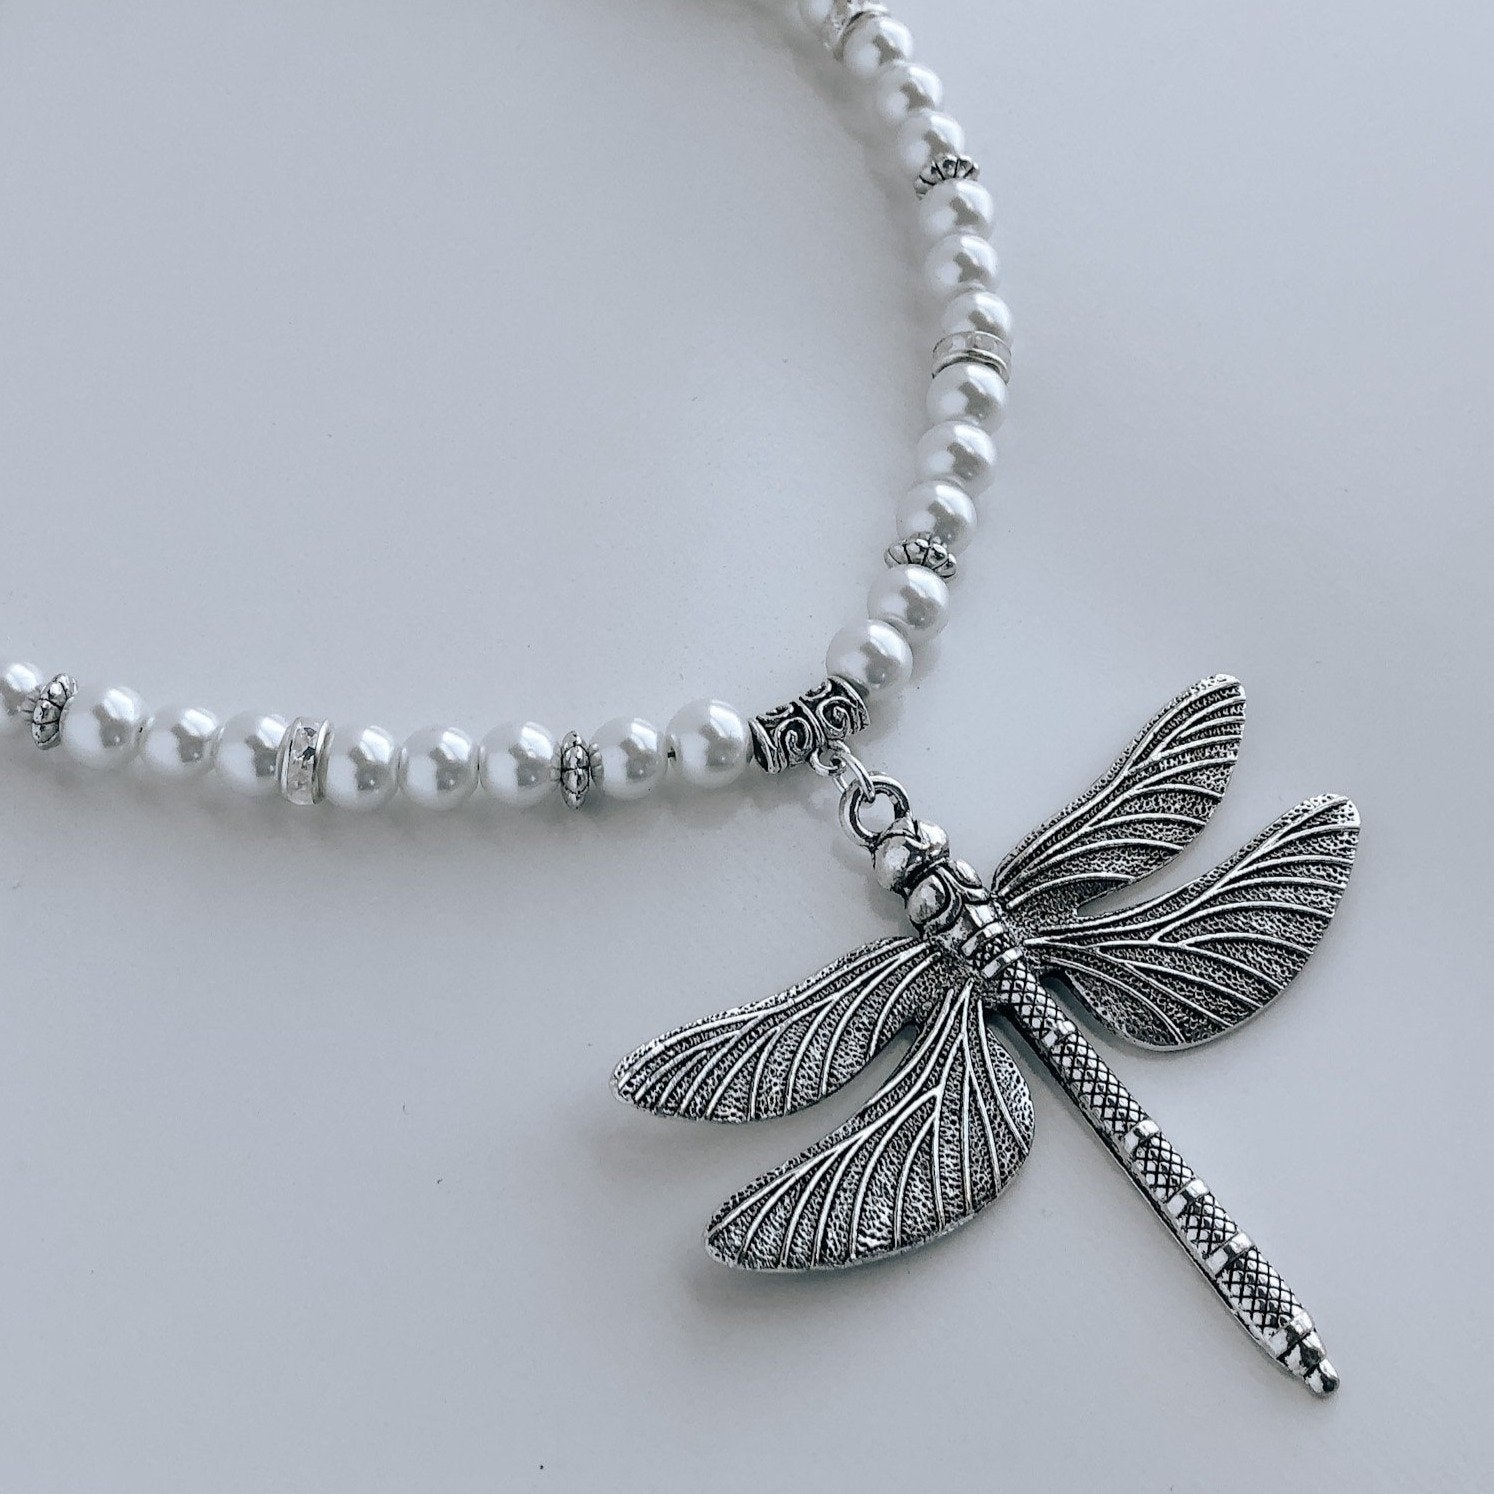 Dreamy Dragonfly Pearl Necklace